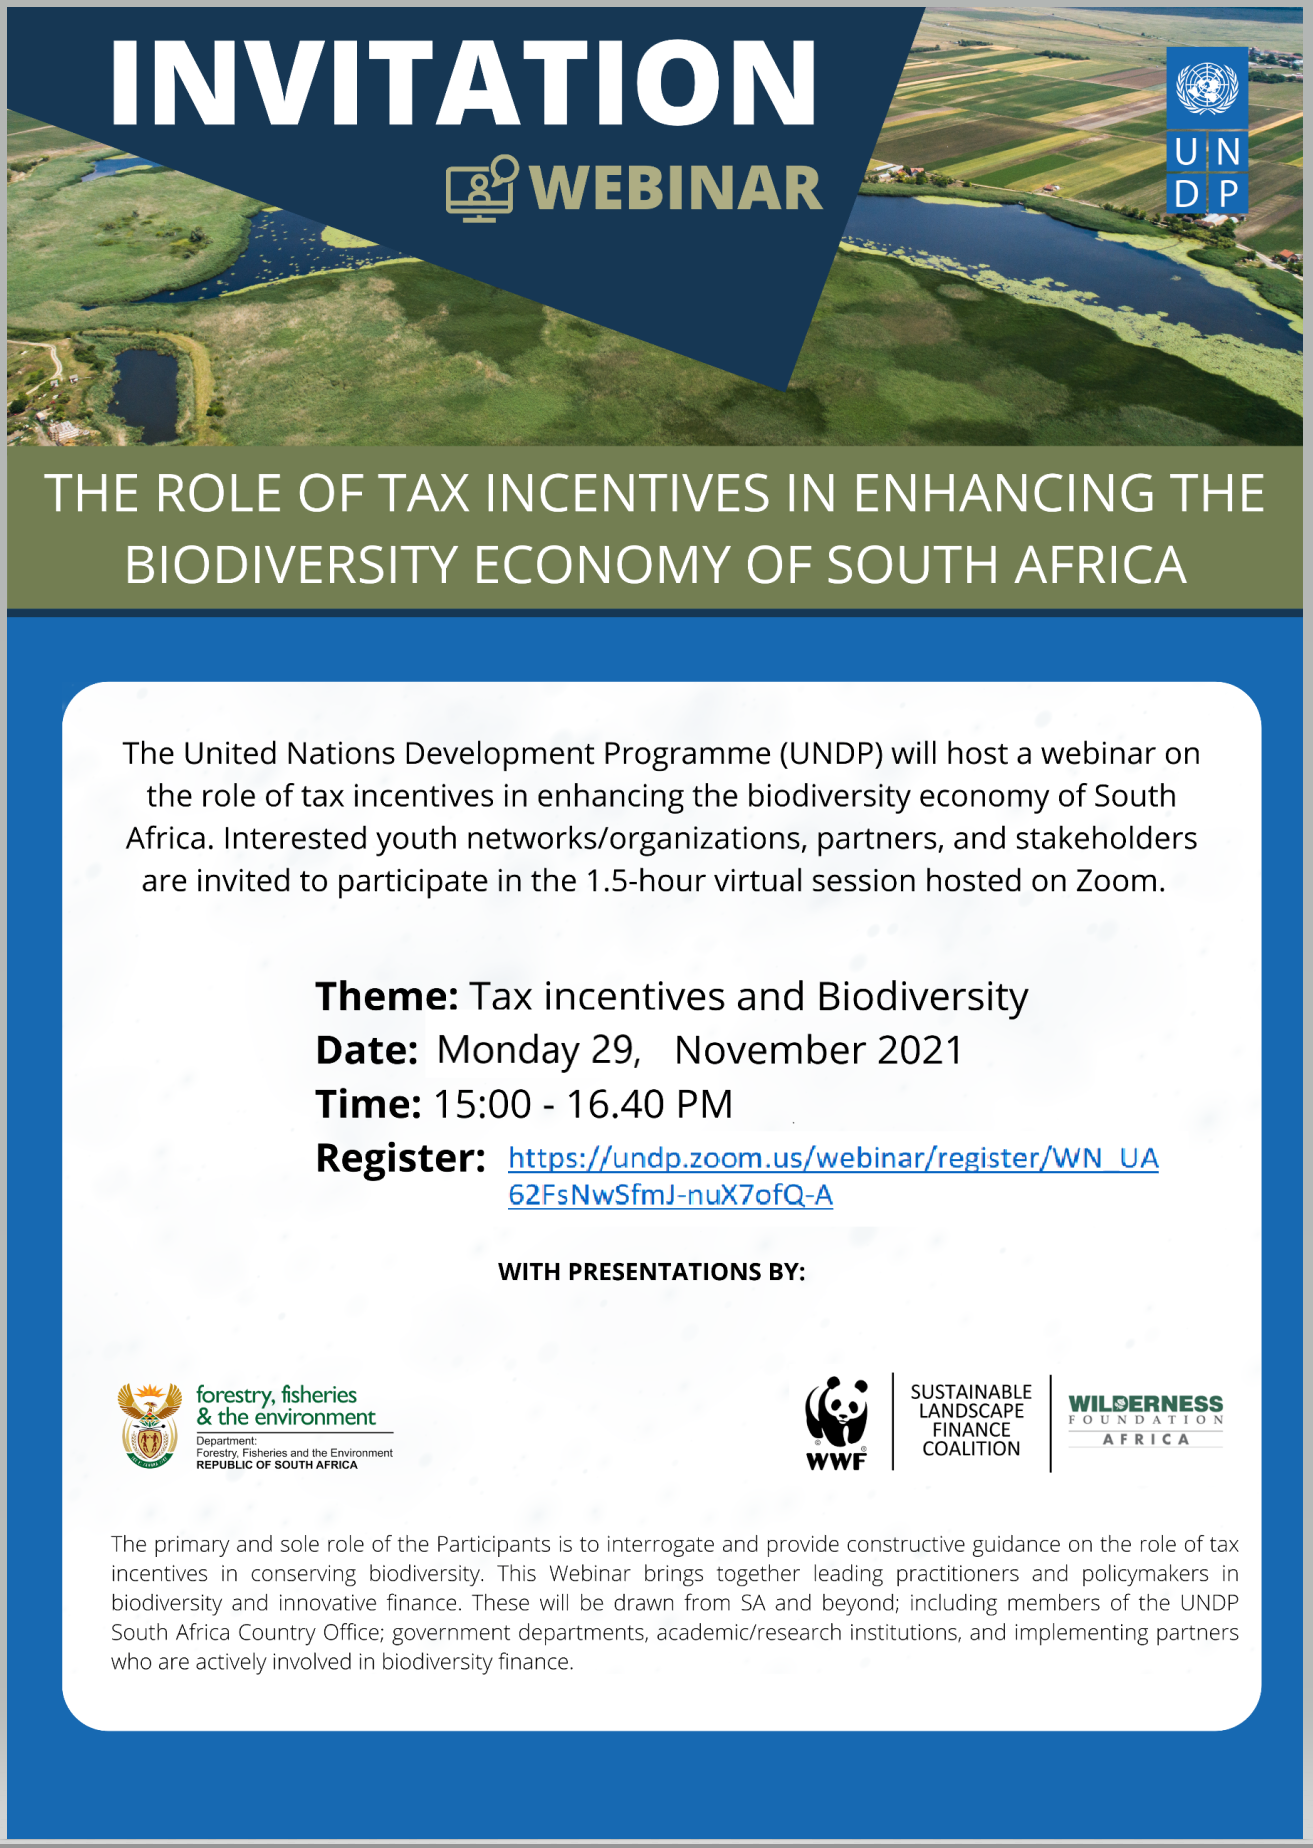 The role of tax incentives in enhancing the biodiversity economy of South Africa